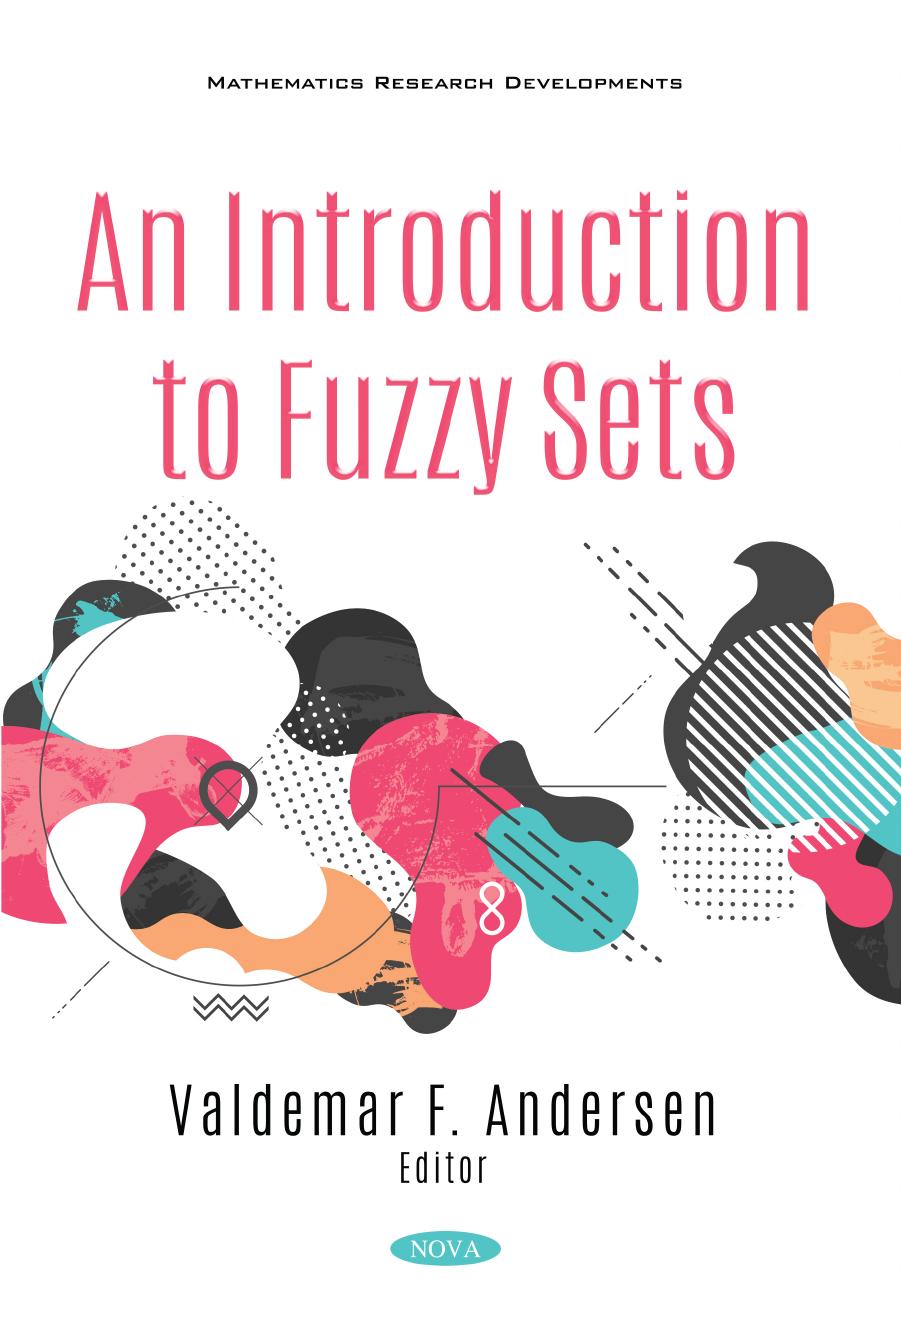 An Introduction to Fuzzy Sets